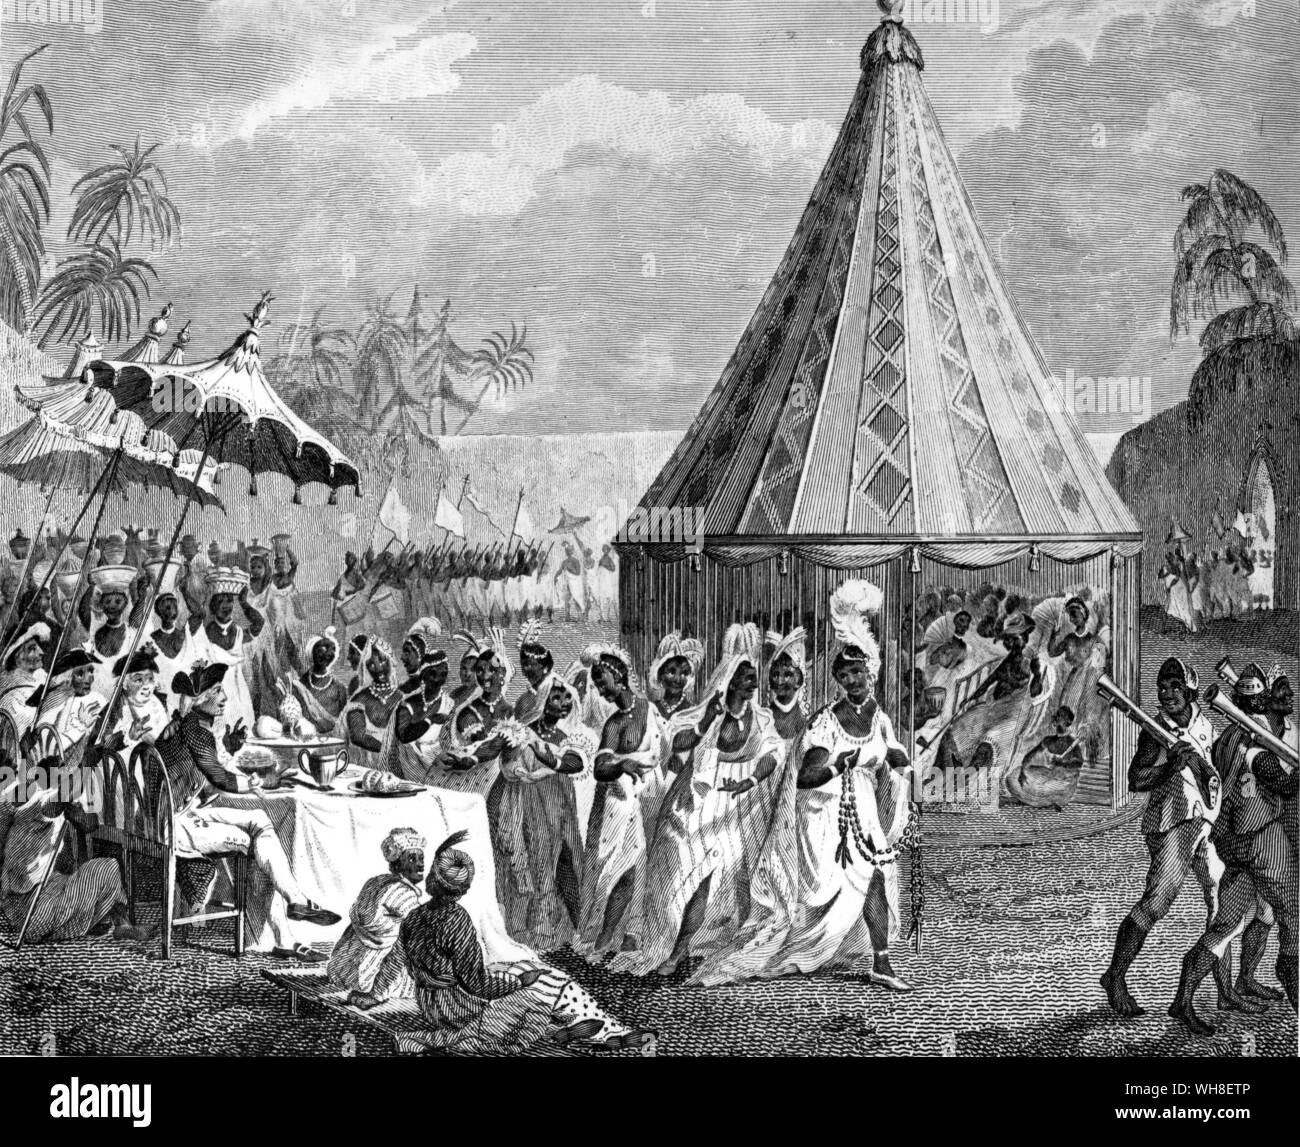 Public Procession of the King's Women' by Francis Chesham (1749-1806). Published in The History of Dahomey by Archibald Dalzel in 1793, page 136.. . . Parade of the King's Women. From: 'History of Dahomey' 1793. Africa. . Stock Photo